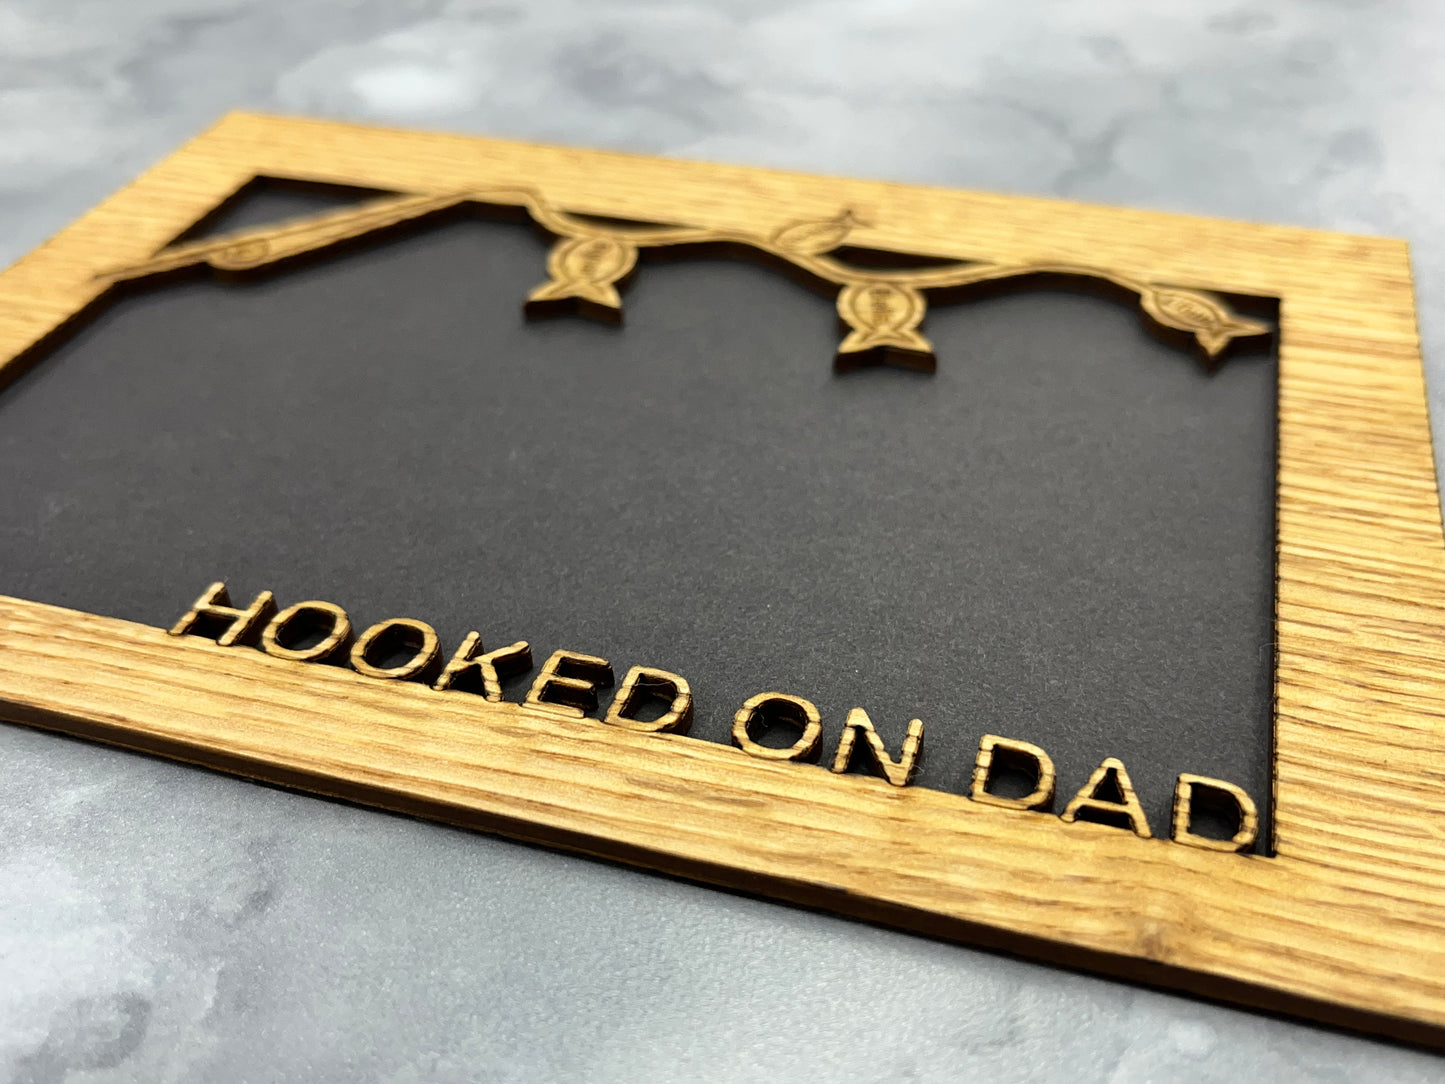 Hooked On Dad Picture Frame - Personalized with Kid's Names